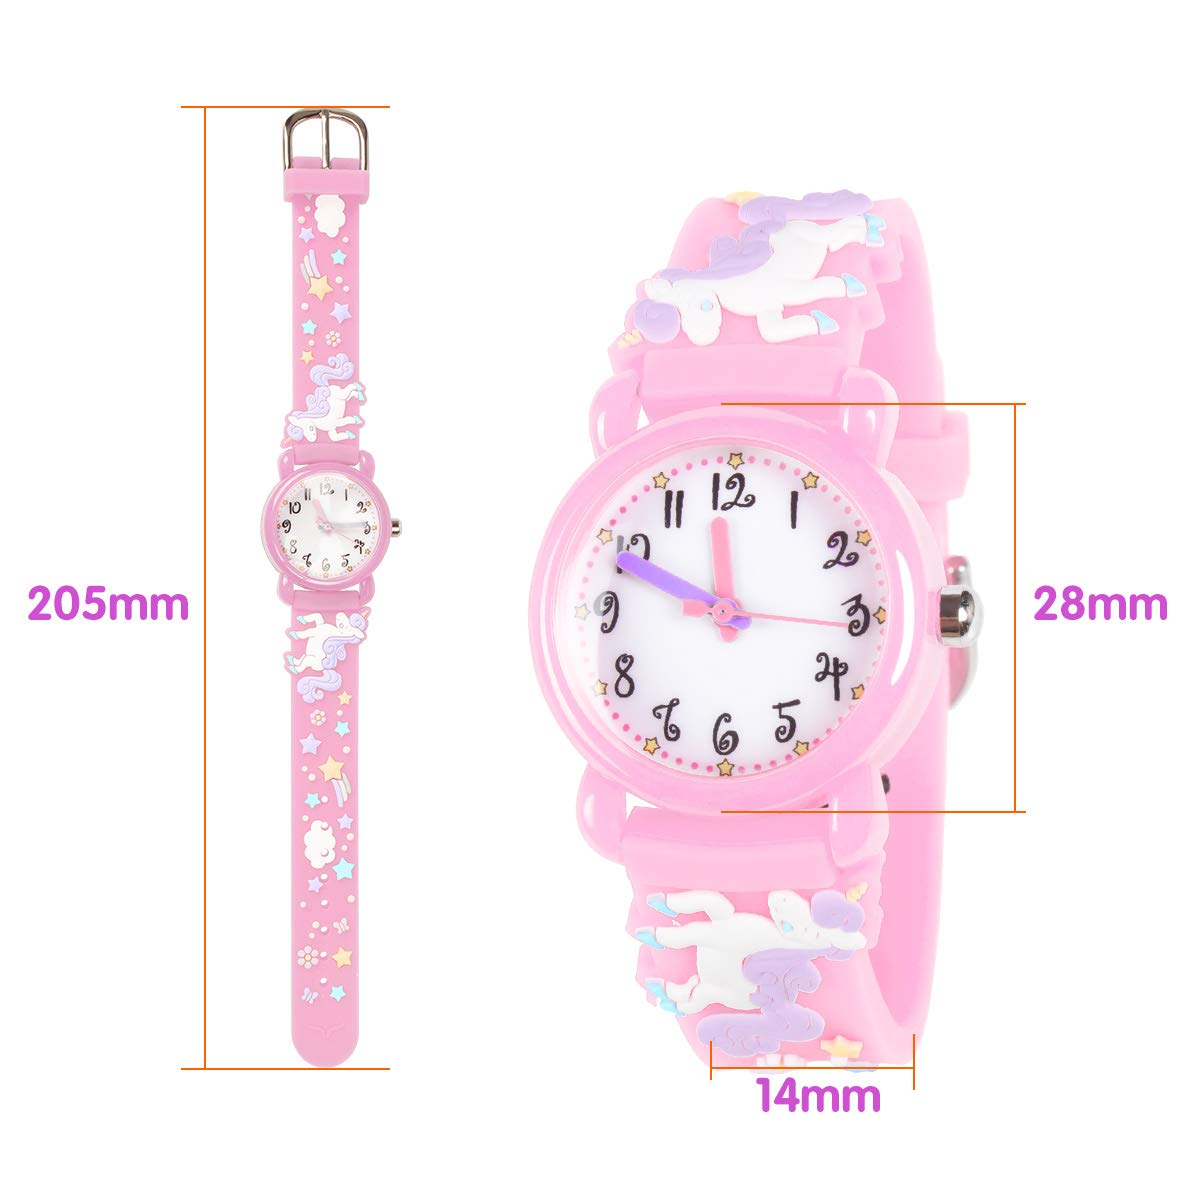 Dodosky Toddler Watches for Girls - Best Toys Gifts for Girls Age 3 4 5 6 7 8